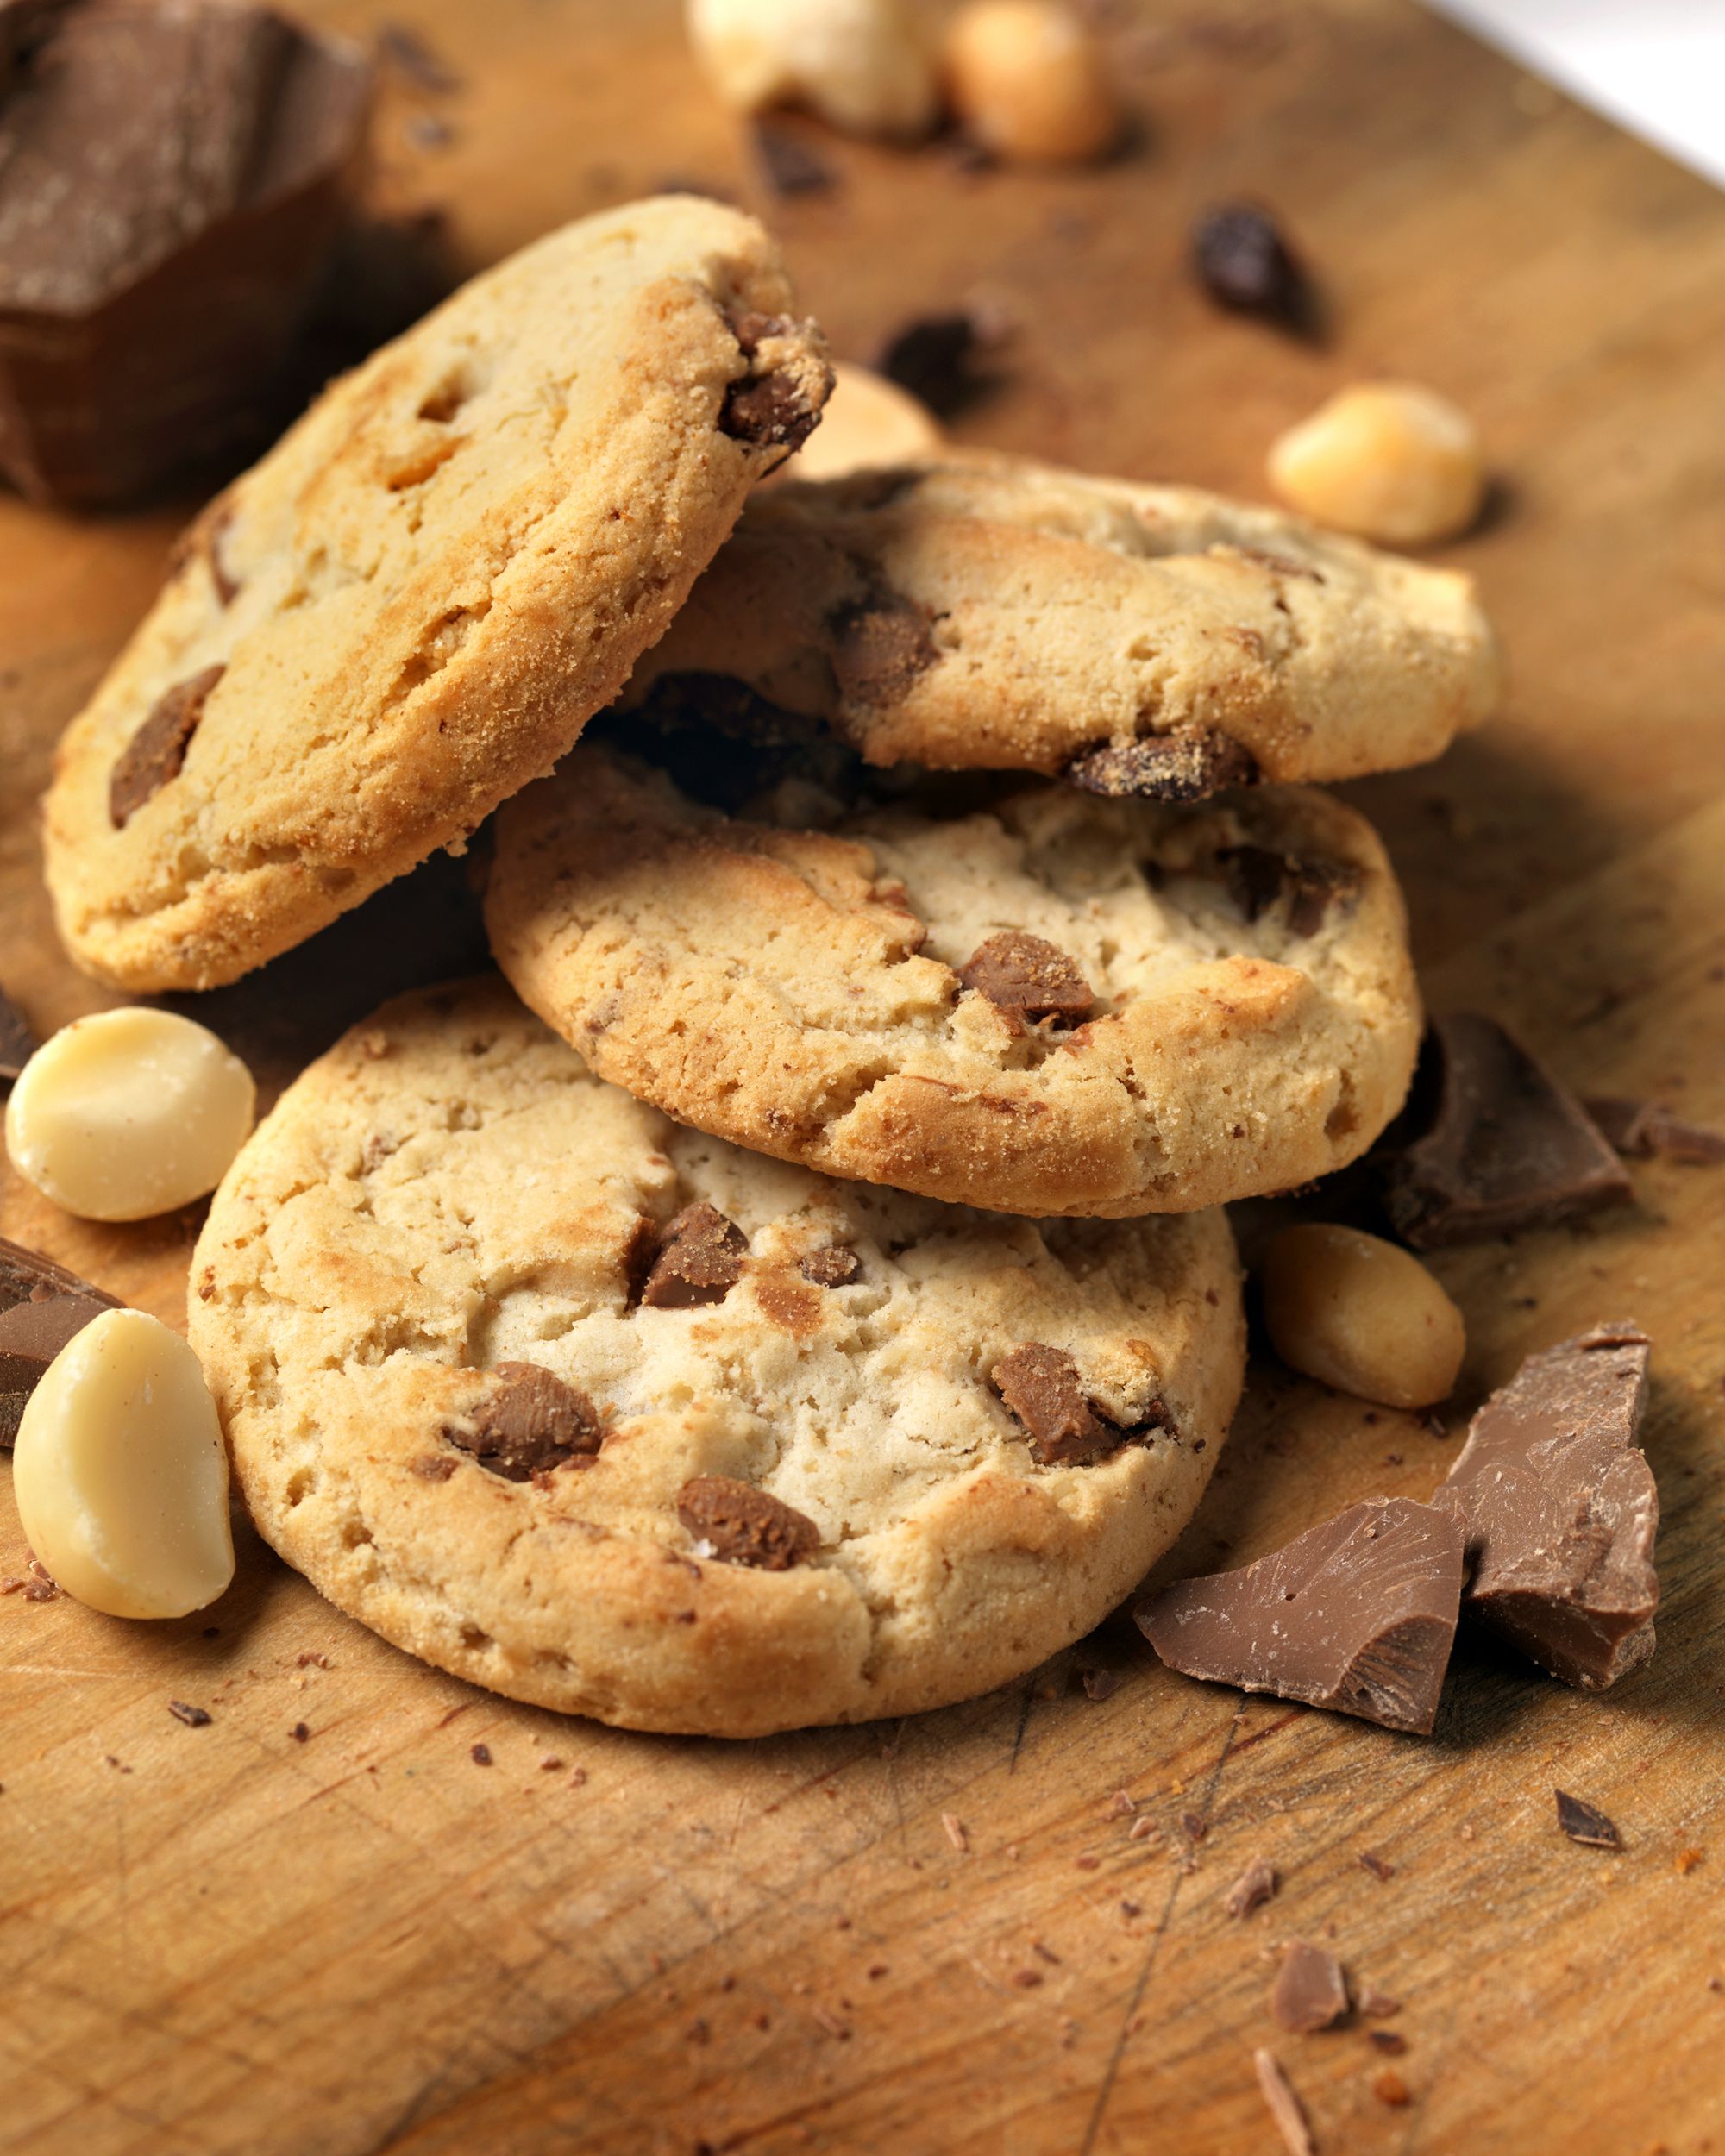 <p>Give chocolate chip cookies a boost of protein and flavor from macadamia nuts. They combine seamlessly with semisweet chocolate and the traditional dough base. Feel free to double up and include another type of nut or just <a href="https://blog.cheapism.com/common-substitutes-cooking-and-baking-ingredients/">substitute a favorite</a> into this treat — but if the nuts are salted, consider skipping the salt used in the batter.</p><p><b>Recipe:</b> <a href="https://www.allrecipes.com/recipe/11026/macadamia-nut-chocolate-chip-cookies/">Allrecipes</a></p>